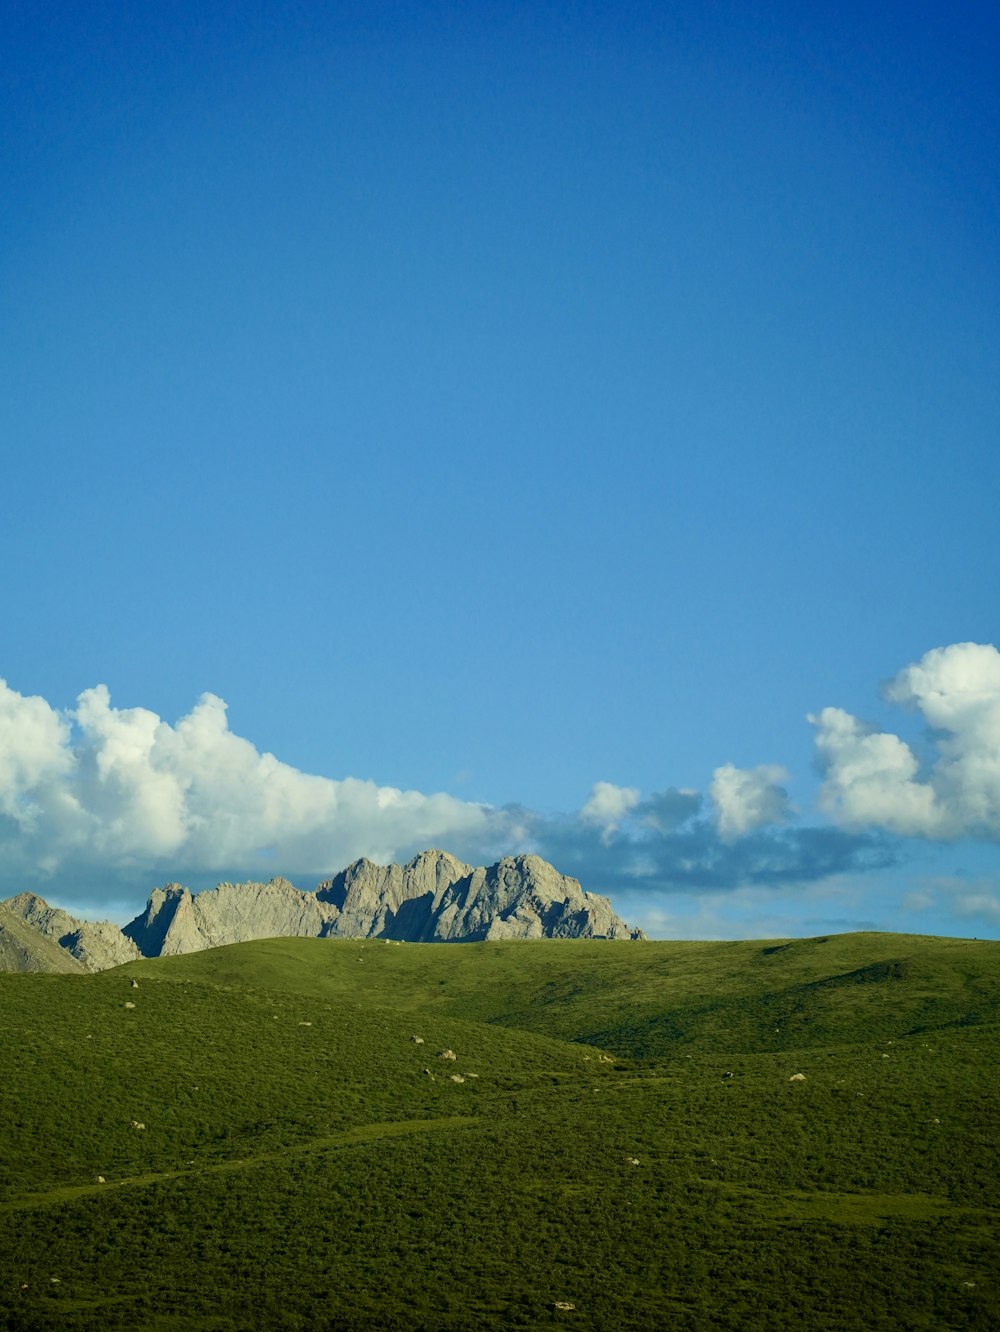 a large grassy field with a mountain in the background